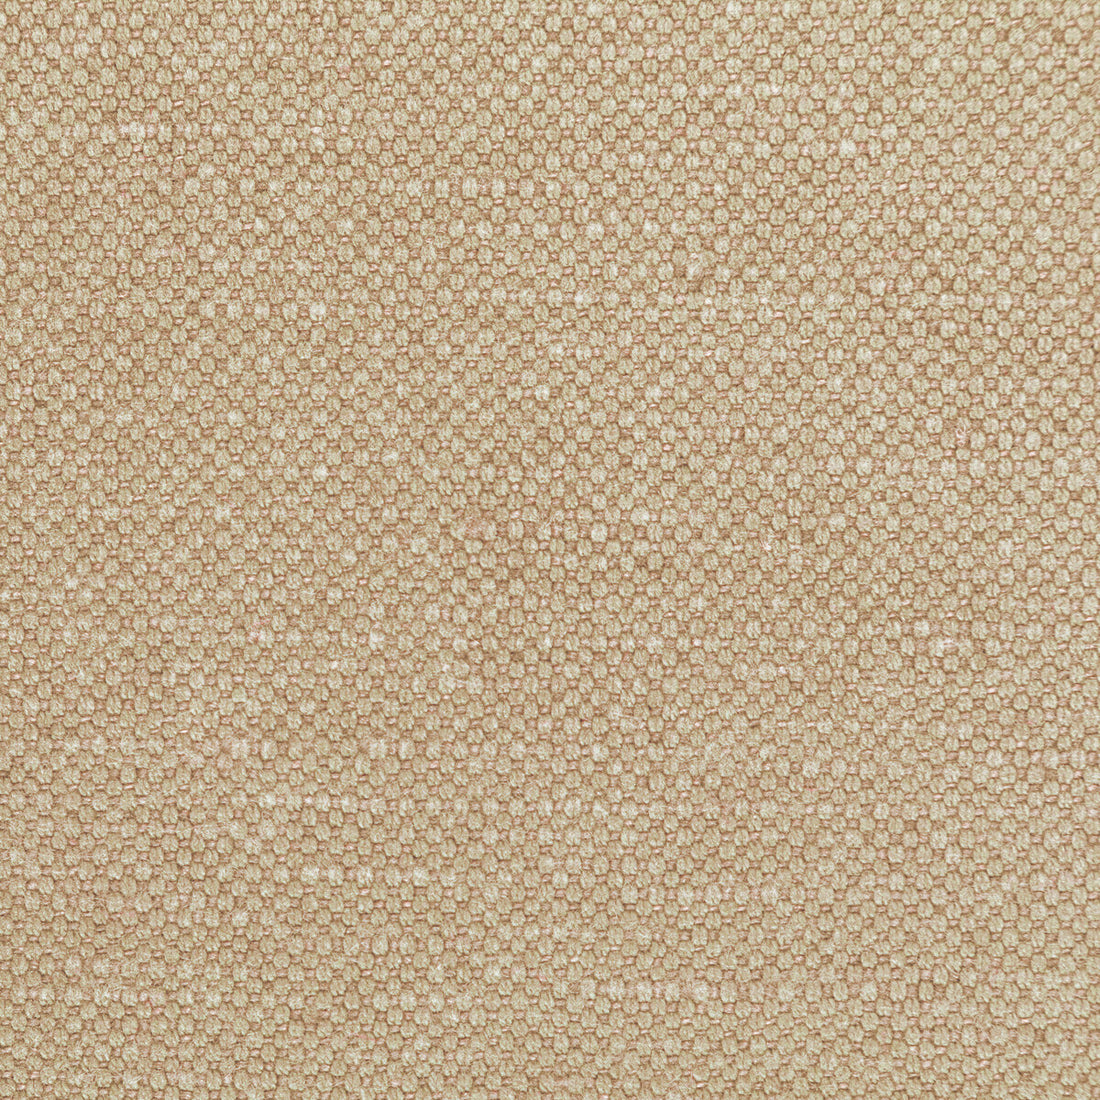 Carson fabric in oatmeal color - pattern 36282.116.0 - by Kravet Basics